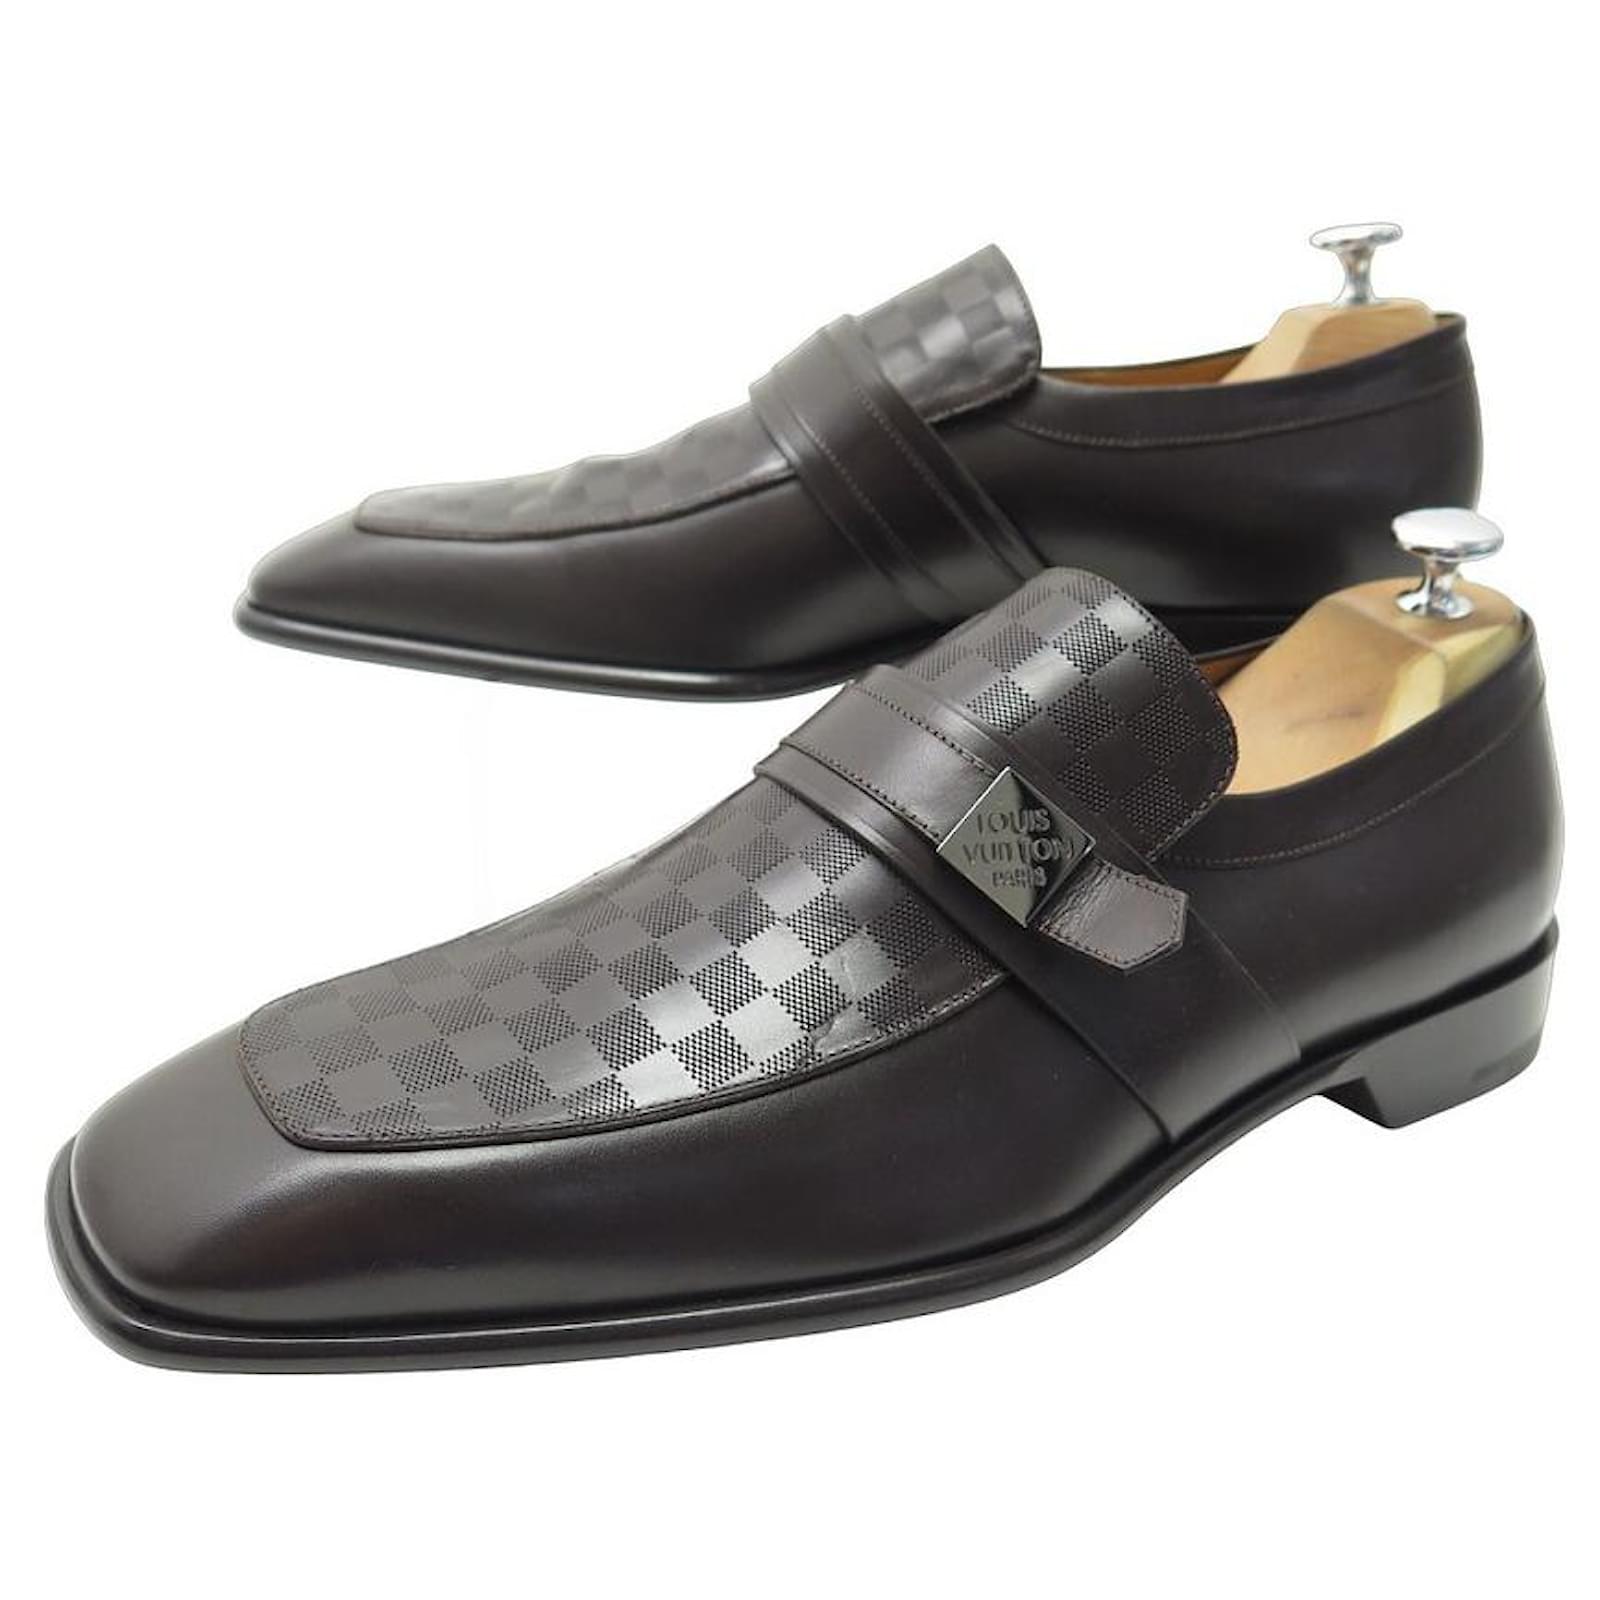 LOUIS VUITTON SHOES DAMIER LEATHER MOCCASIN 09.5 43.5 LOAFERS